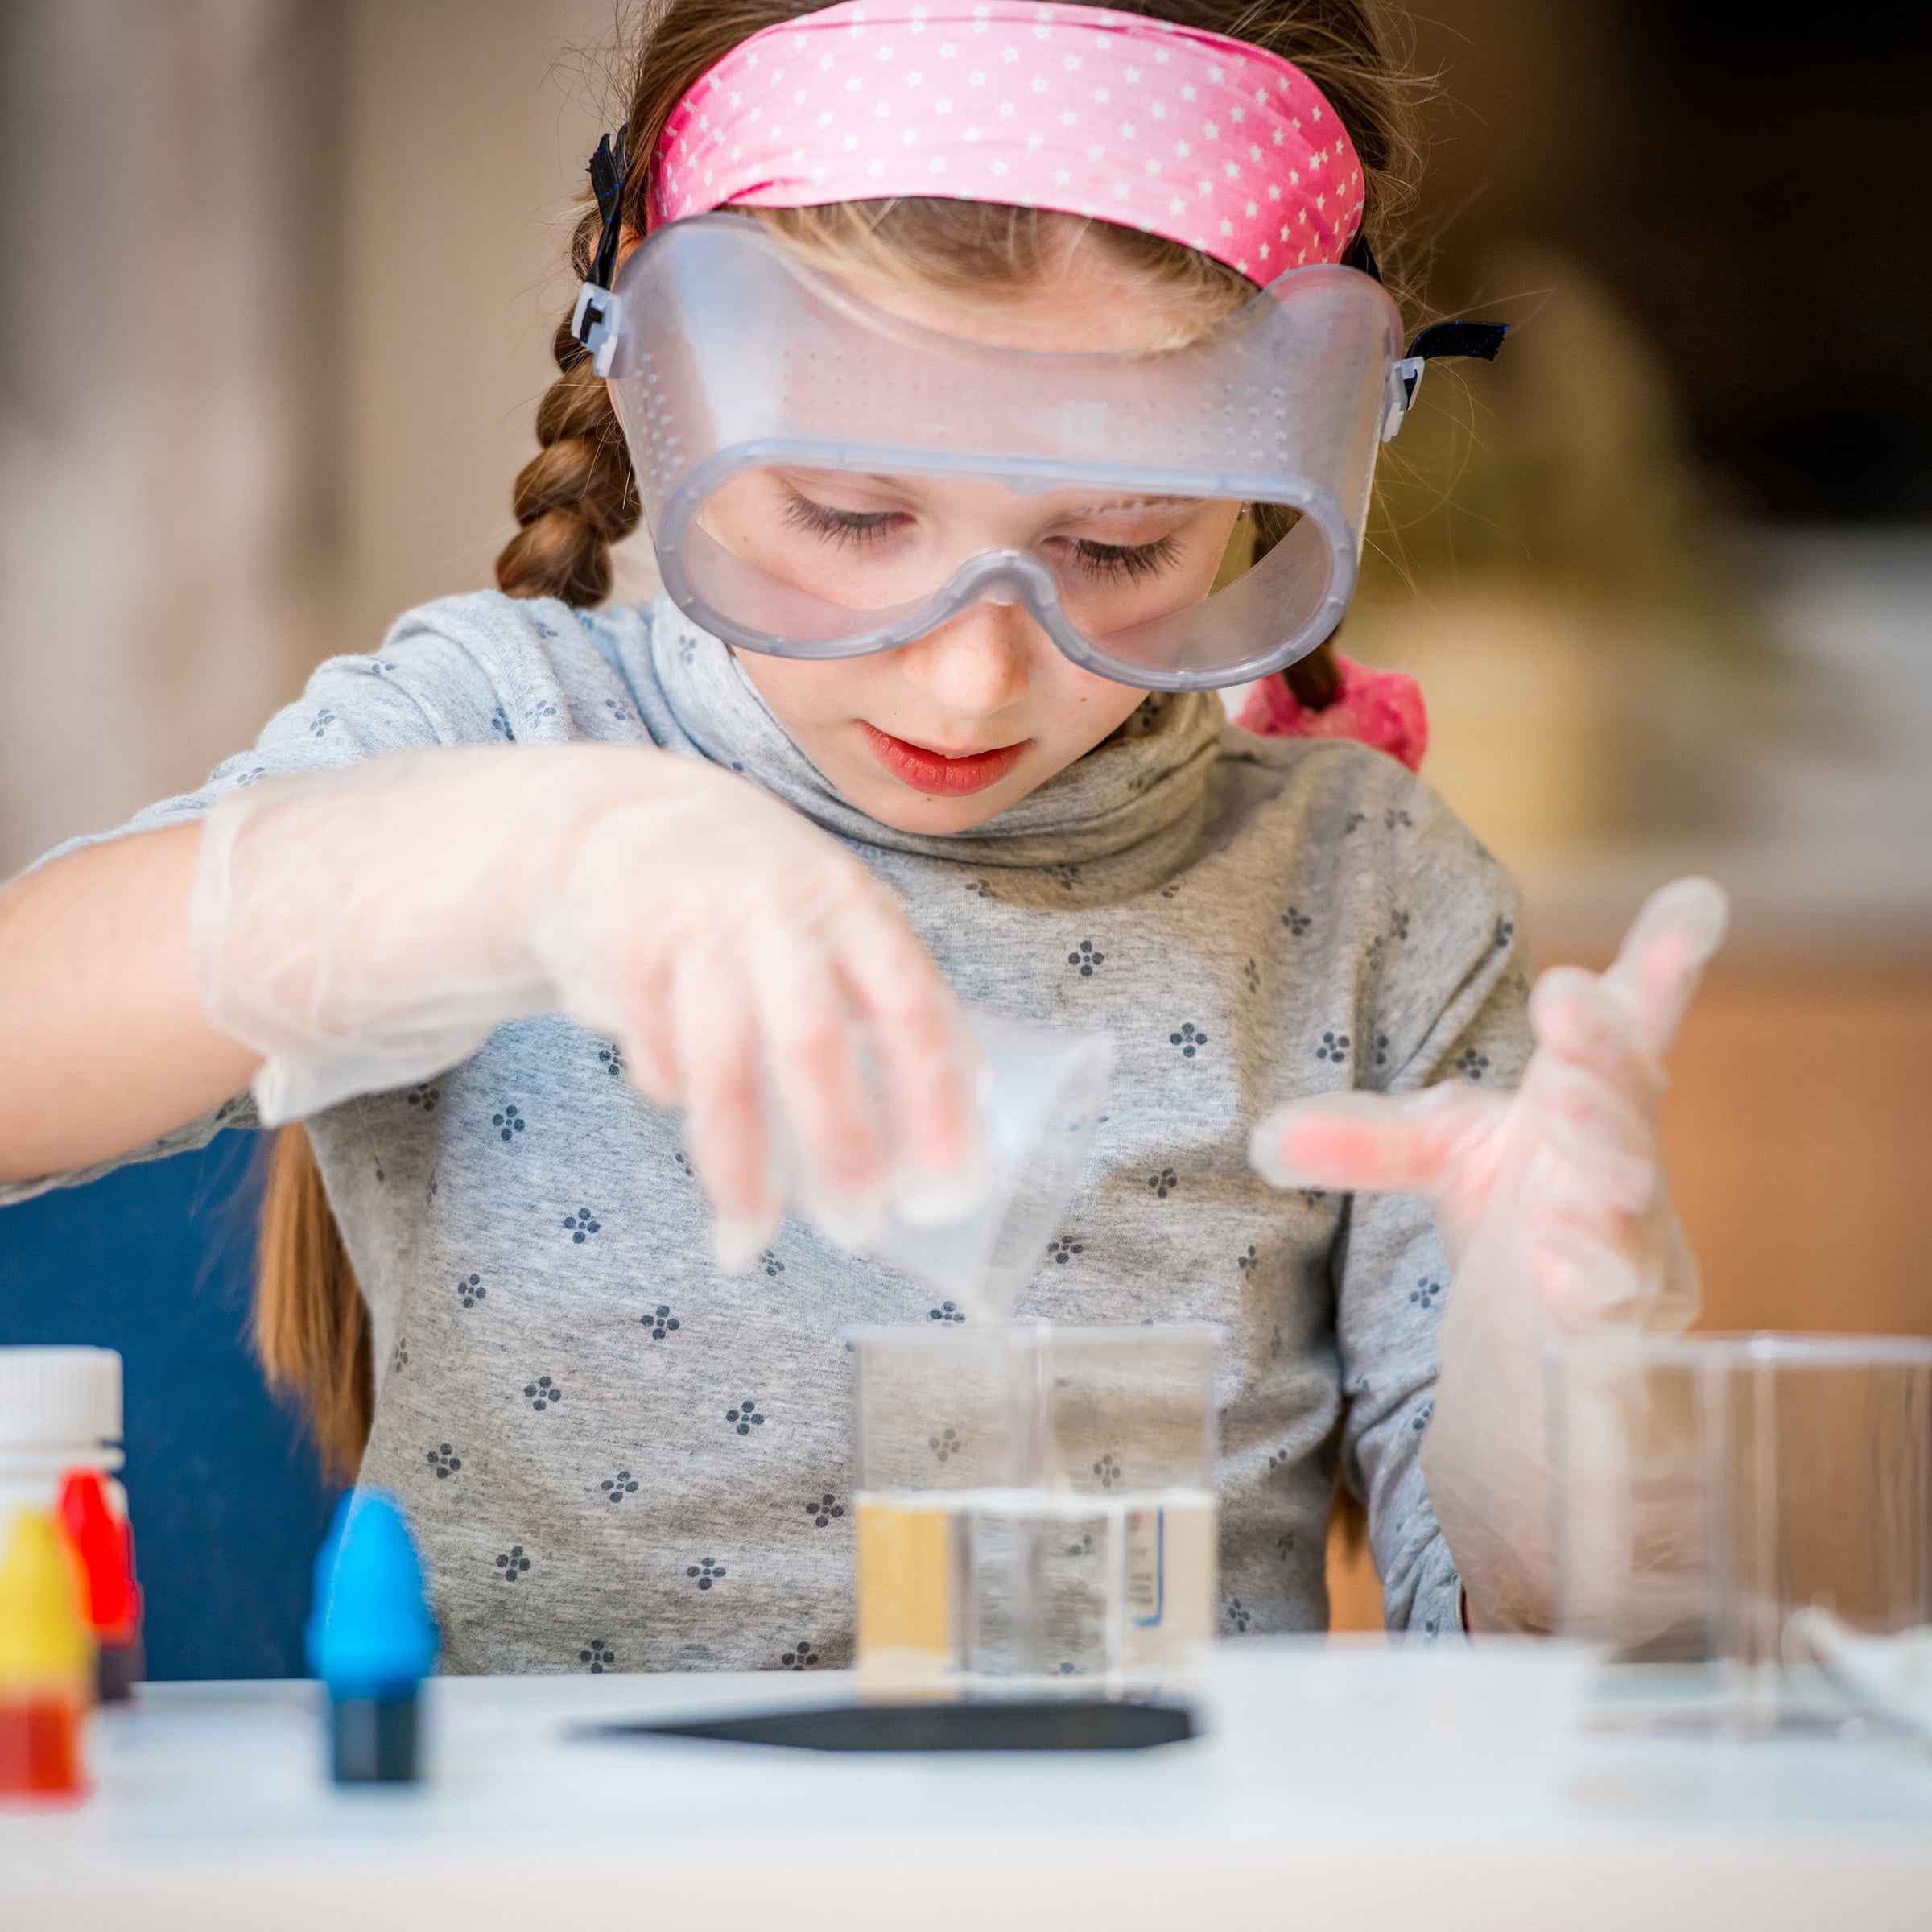 13 Interest Science Kits for 6-Year-Olds For Your Little Einstein